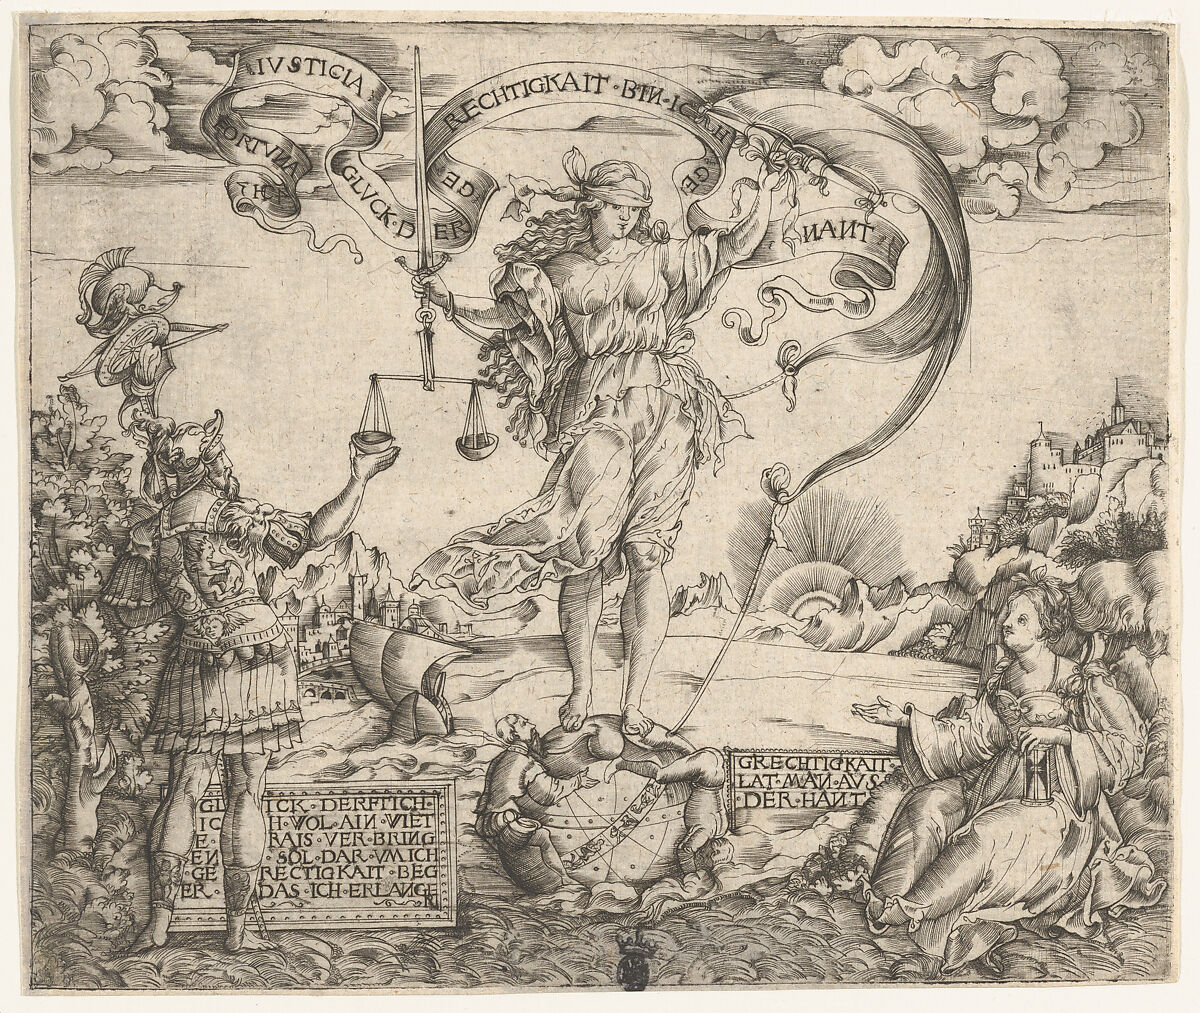 Allegory of Fortuna and Justice, Monogrammist HC (German, active 1534), Etching and engraving 